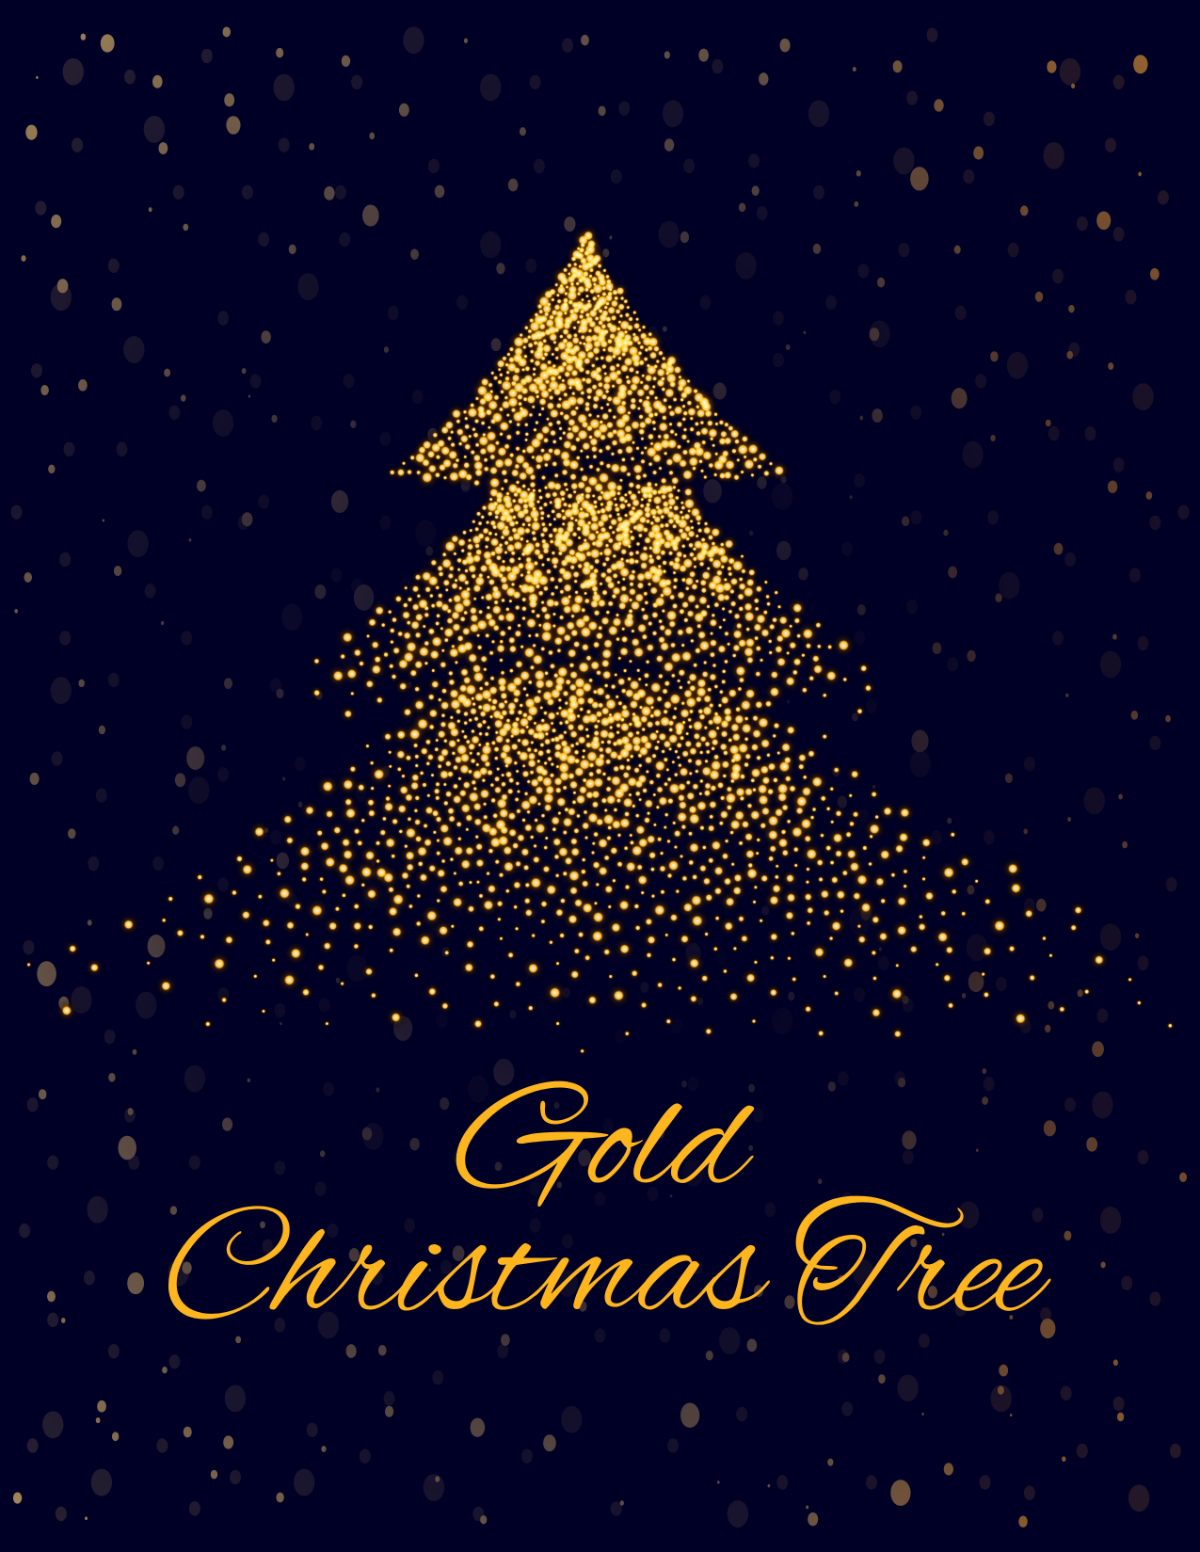 Gold Christmas Tree Template